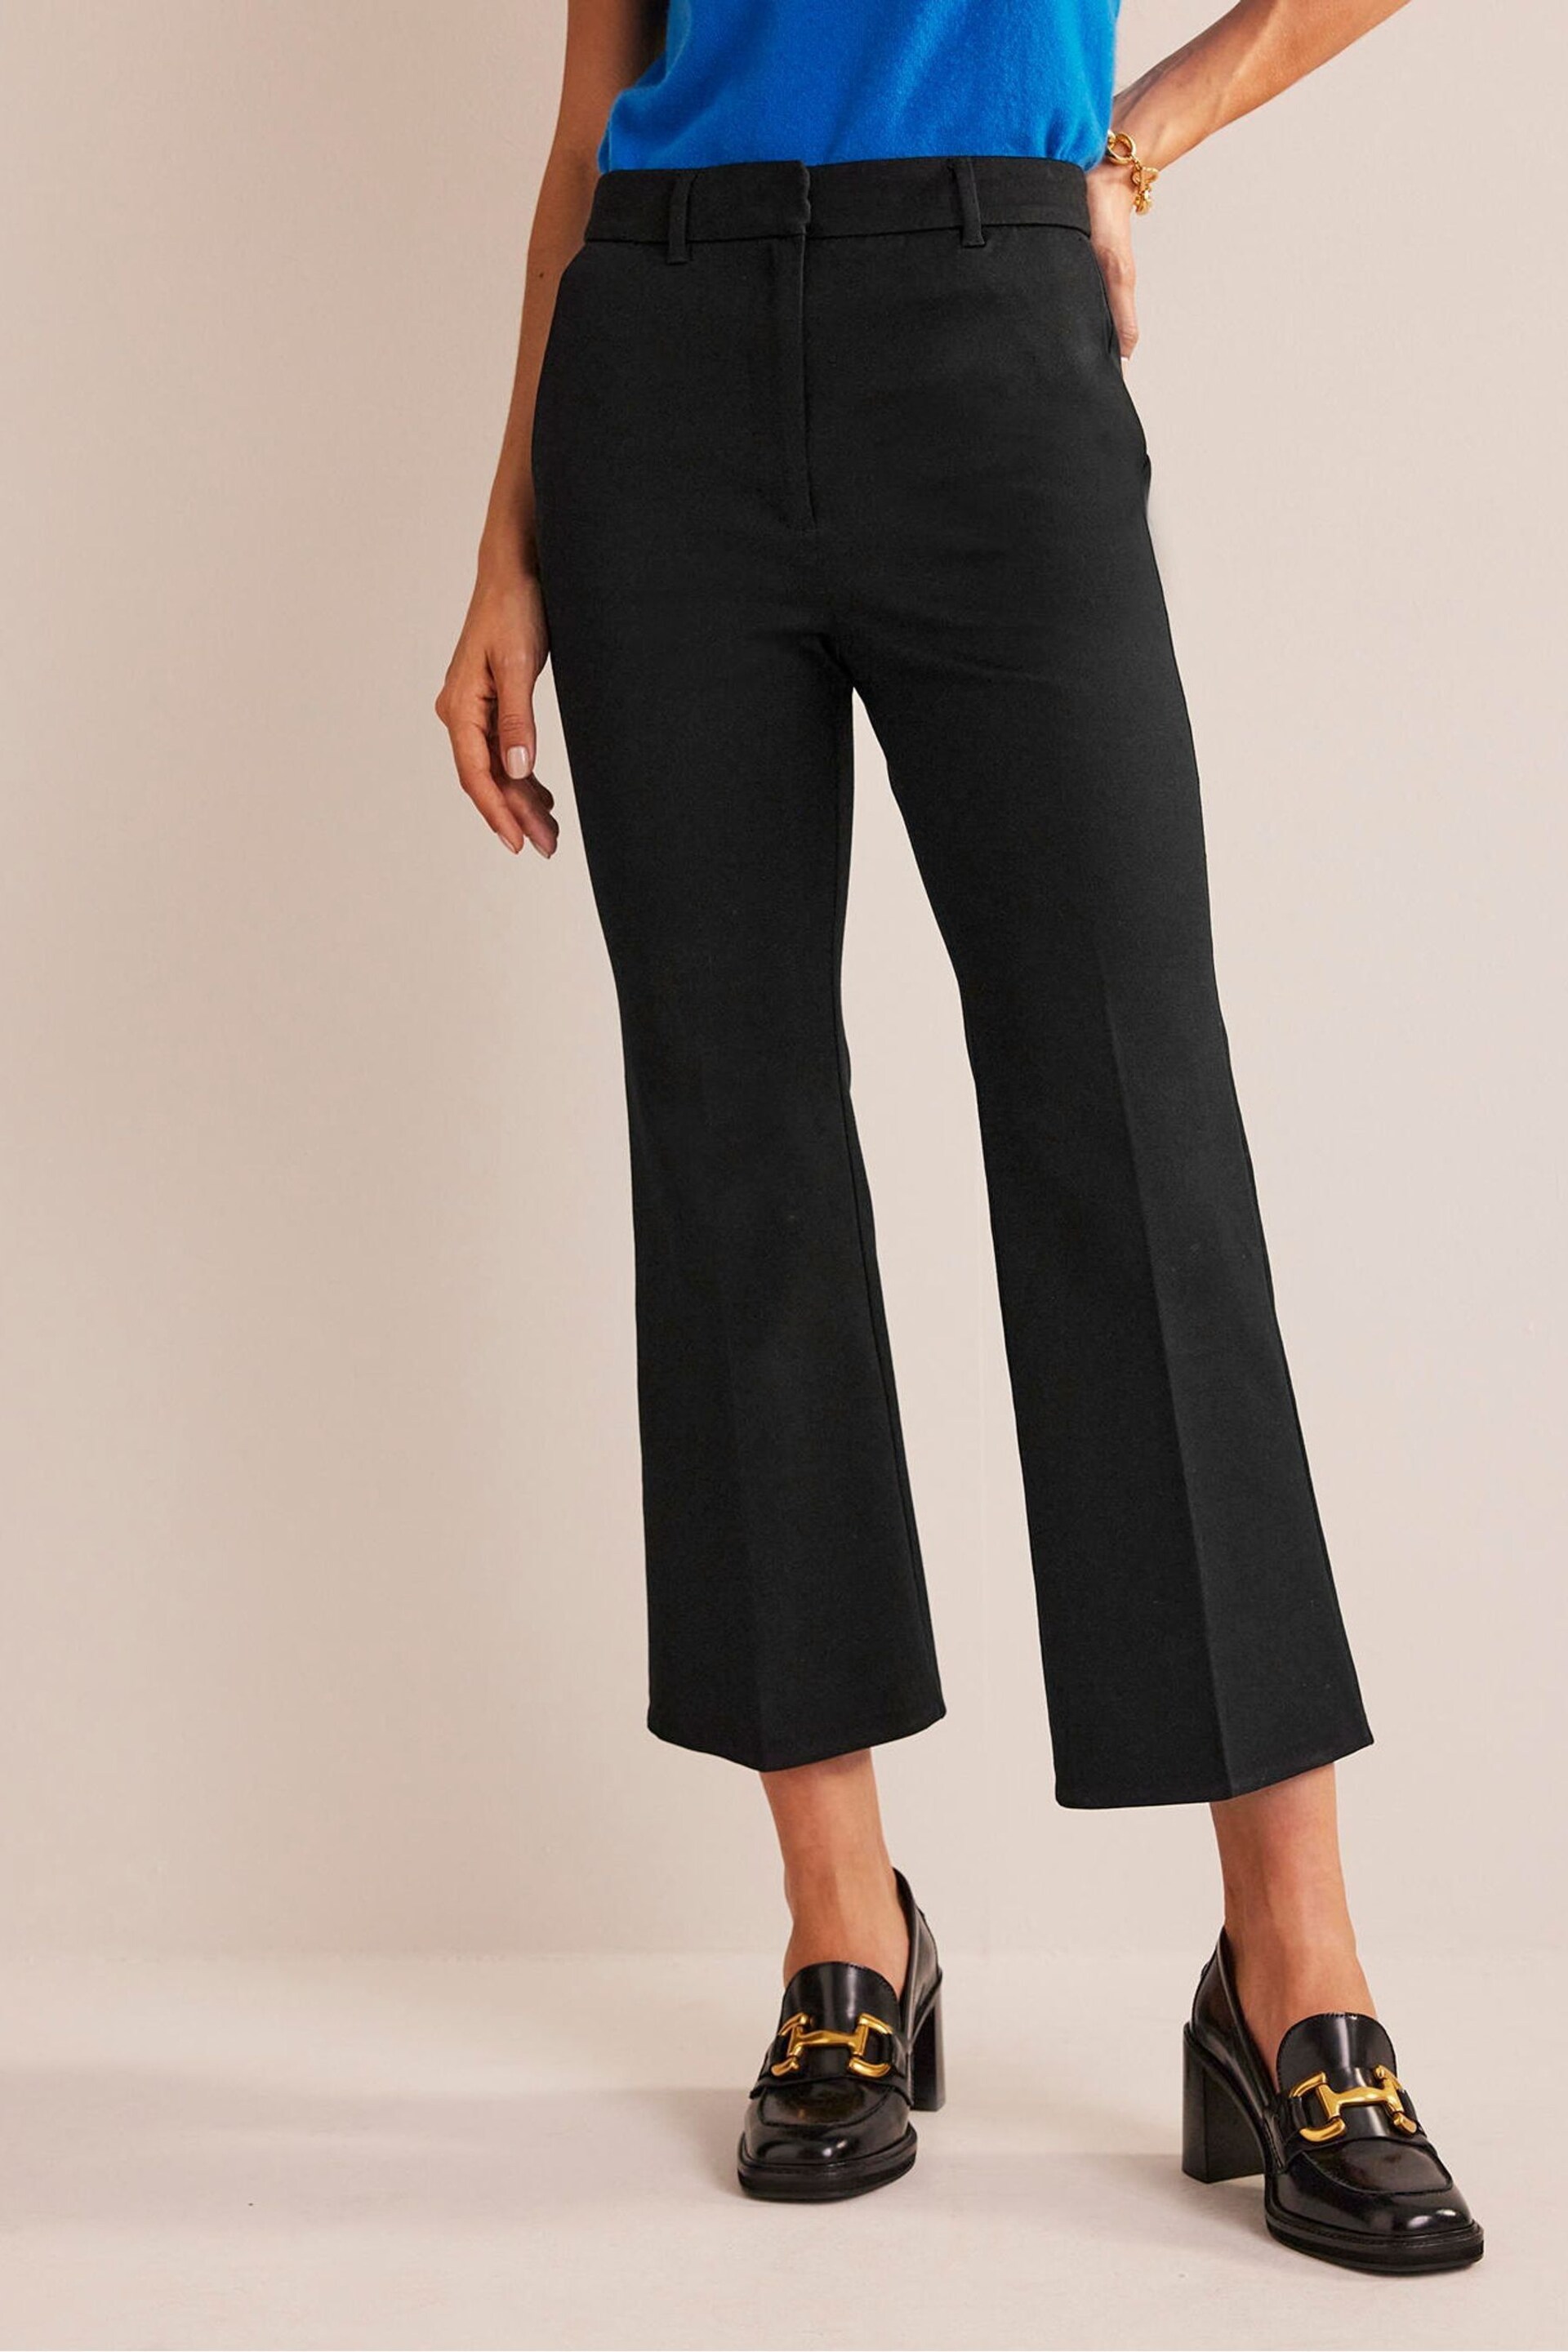 Boden Black Chelsea Bi-Stretch Trousers - Image 1 of 4